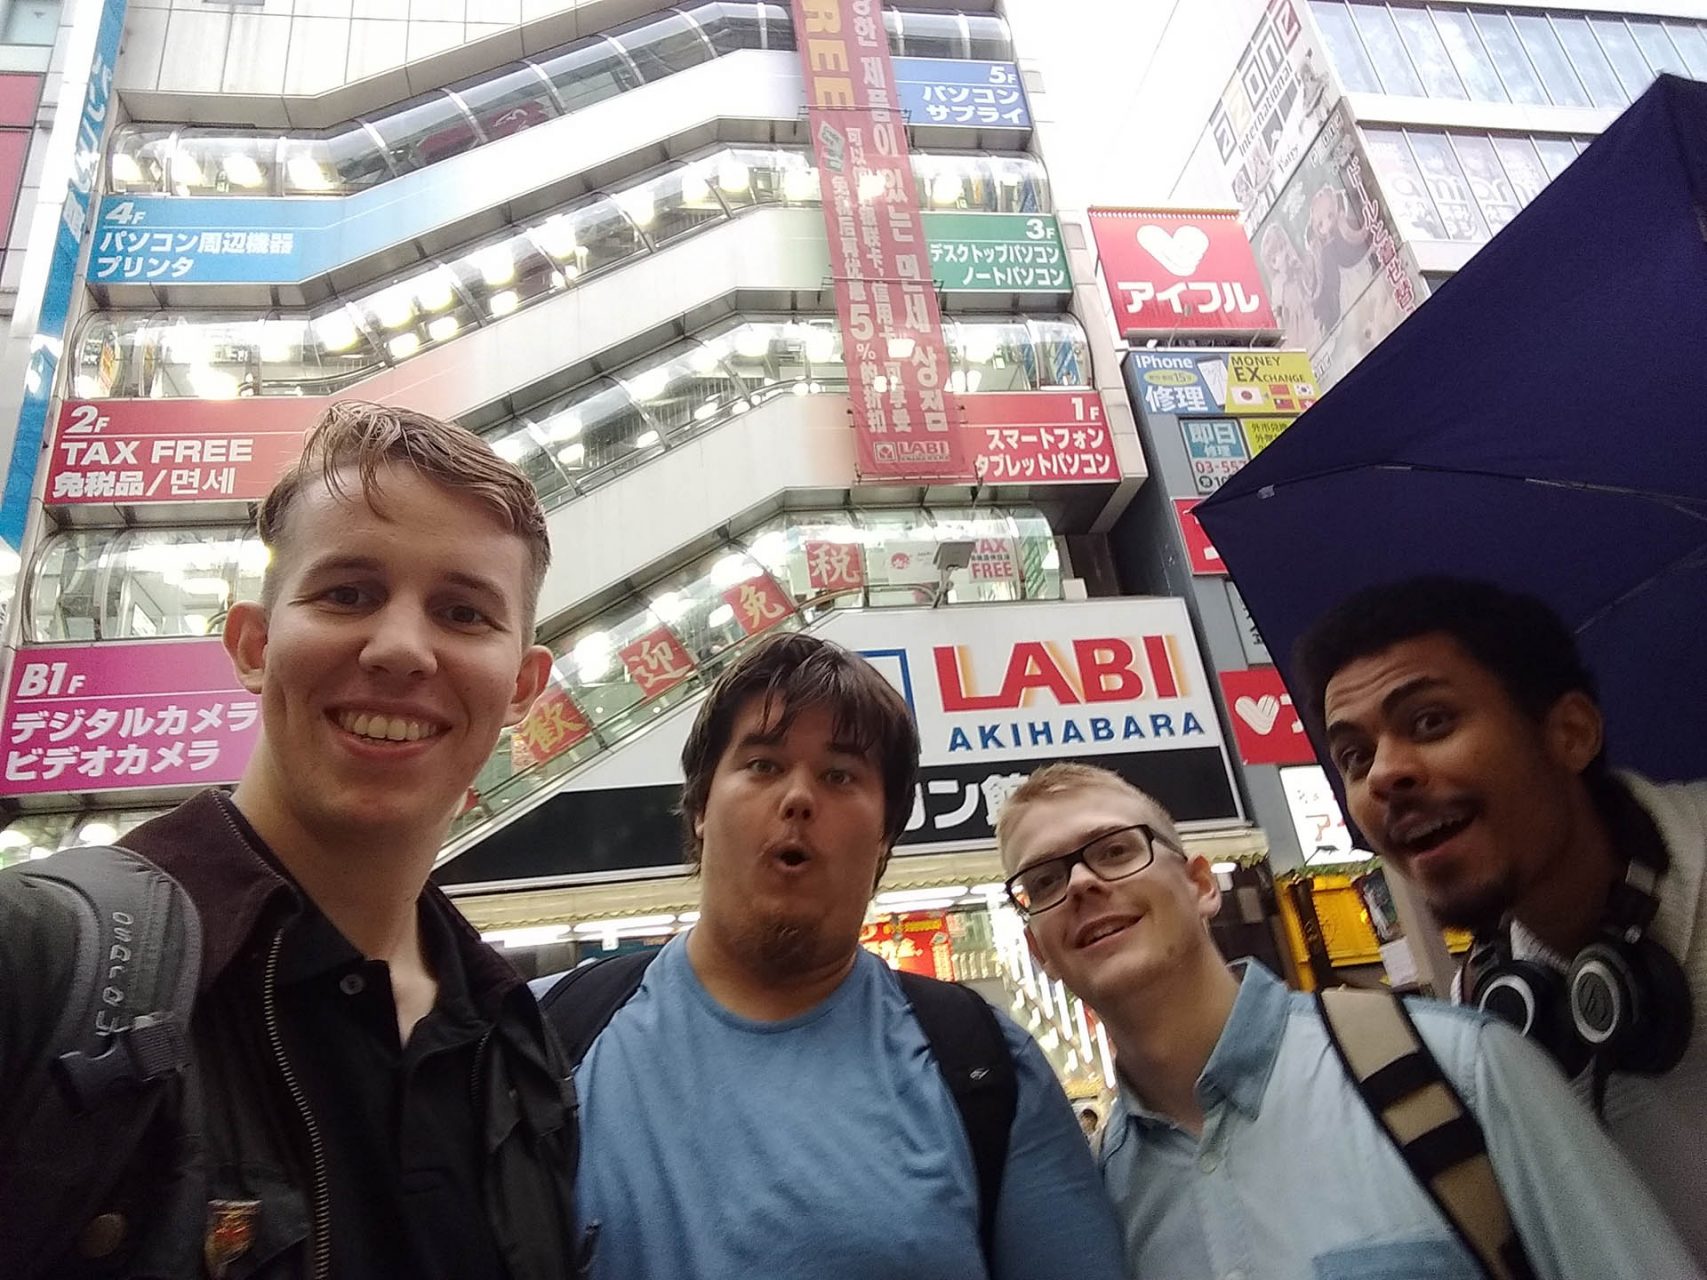 Part of the team in Japan for the Tokyo Game Show 2018